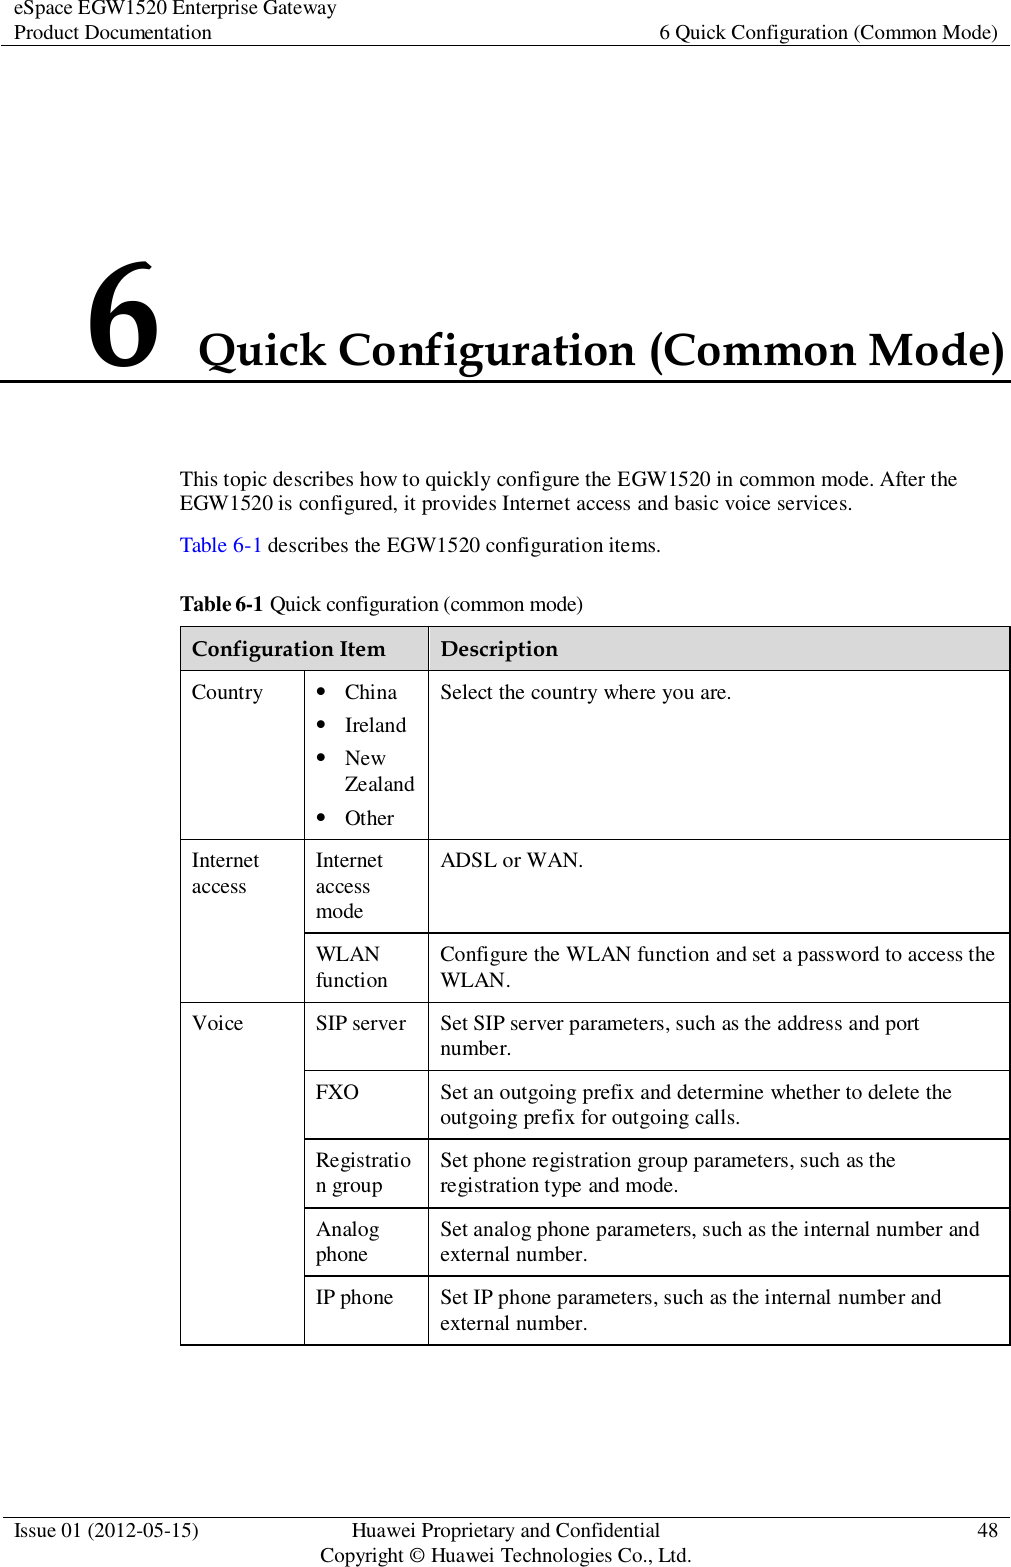 eSpace EGW1520 Enterprise Gateway Product Documentation 6 Quick Configuration (Common Mode)  Issue 01 (2012-05-15) Huawei Proprietary and Confidential                                     Copyright © Huawei Technologies Co., Ltd. 48  6 Quick Configuration (Common Mode) This topic describes how to quickly configure the EGW1520 in common mode. After the EGW1520 is configured, it provides Internet access and basic voice services. Table 6-1 describes the EGW1520 configuration items. Table 6-1 Quick configuration (common mode) Configuration Item Description Country  China  Ireland  New Zealand  Other Select the country where you are. Internet access Internet access mode ADSL or WAN. WLAN function Configure the WLAN function and set a password to access the WLAN. Voice SIP server Set SIP server parameters, such as the address and port number. FXO Set an outgoing prefix and determine whether to delete the outgoing prefix for outgoing calls. Registration group Set phone registration group parameters, such as the registration type and mode. Analog phone Set analog phone parameters, such as the internal number and external number. IP phone Set IP phone parameters, such as the internal number and external number.  